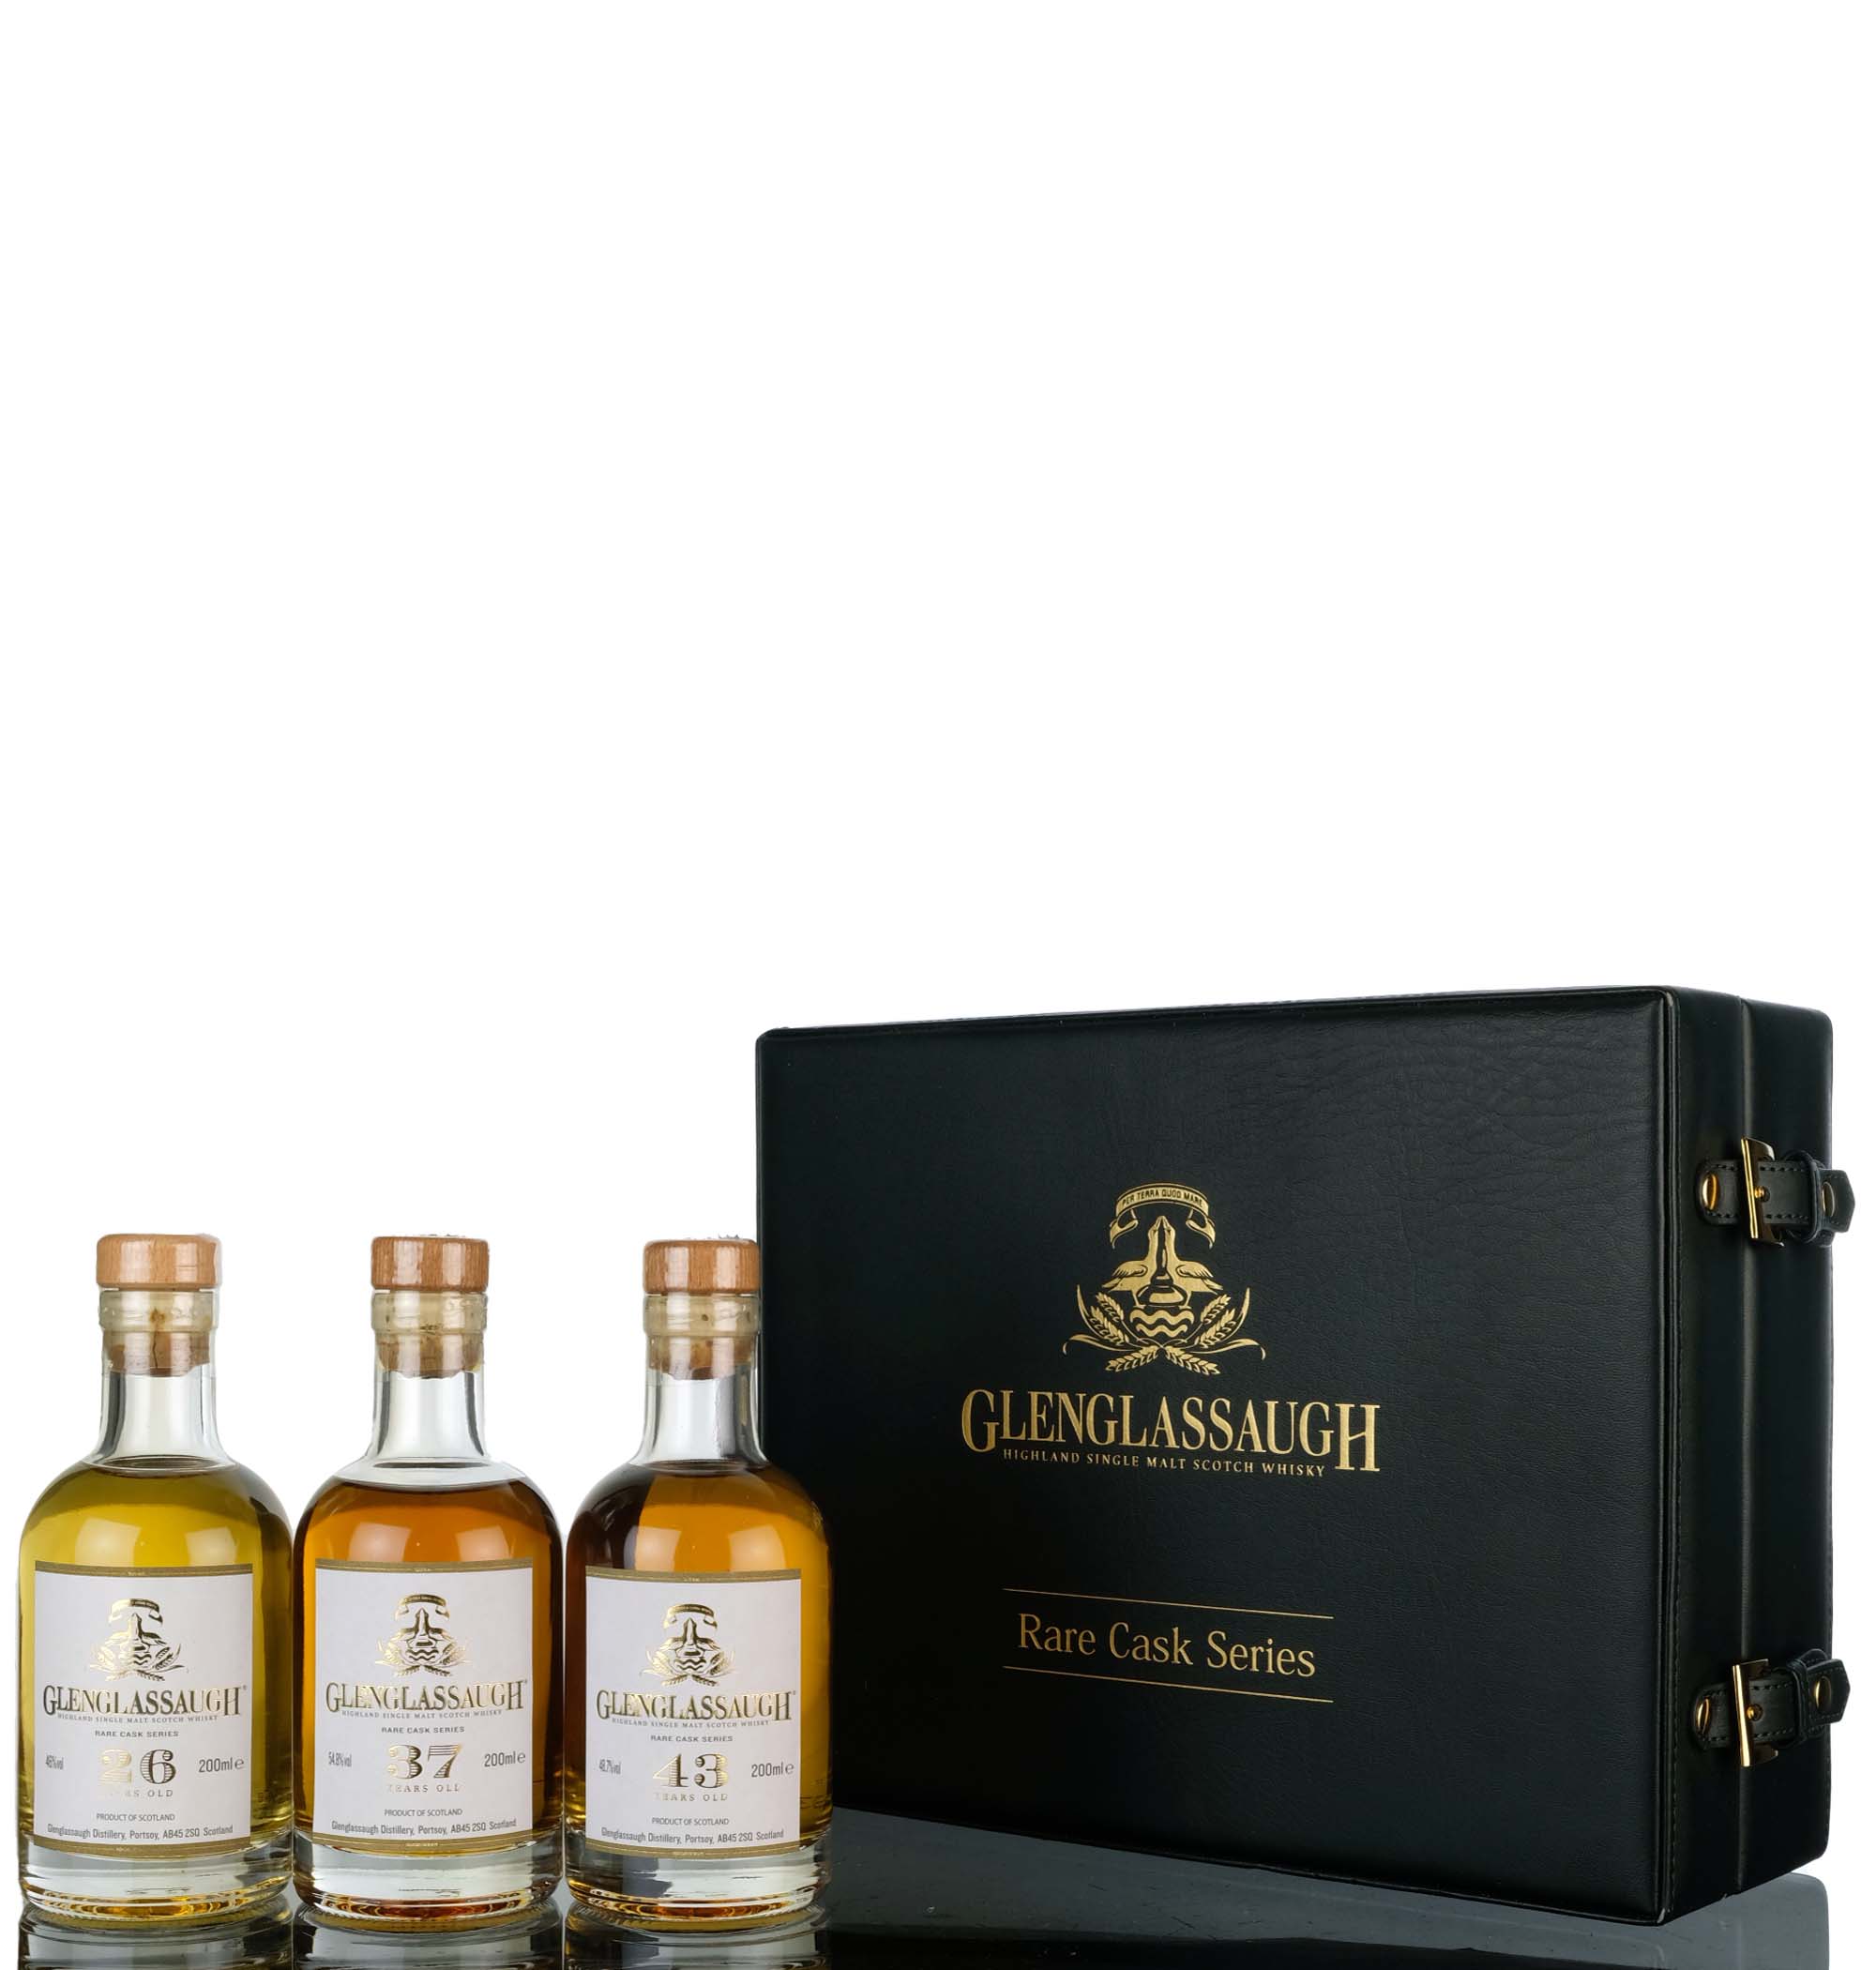 Glenglassaugh Rare Cask Series Box Set - 26 Year Old - 37 Year Old - 43 Year Old